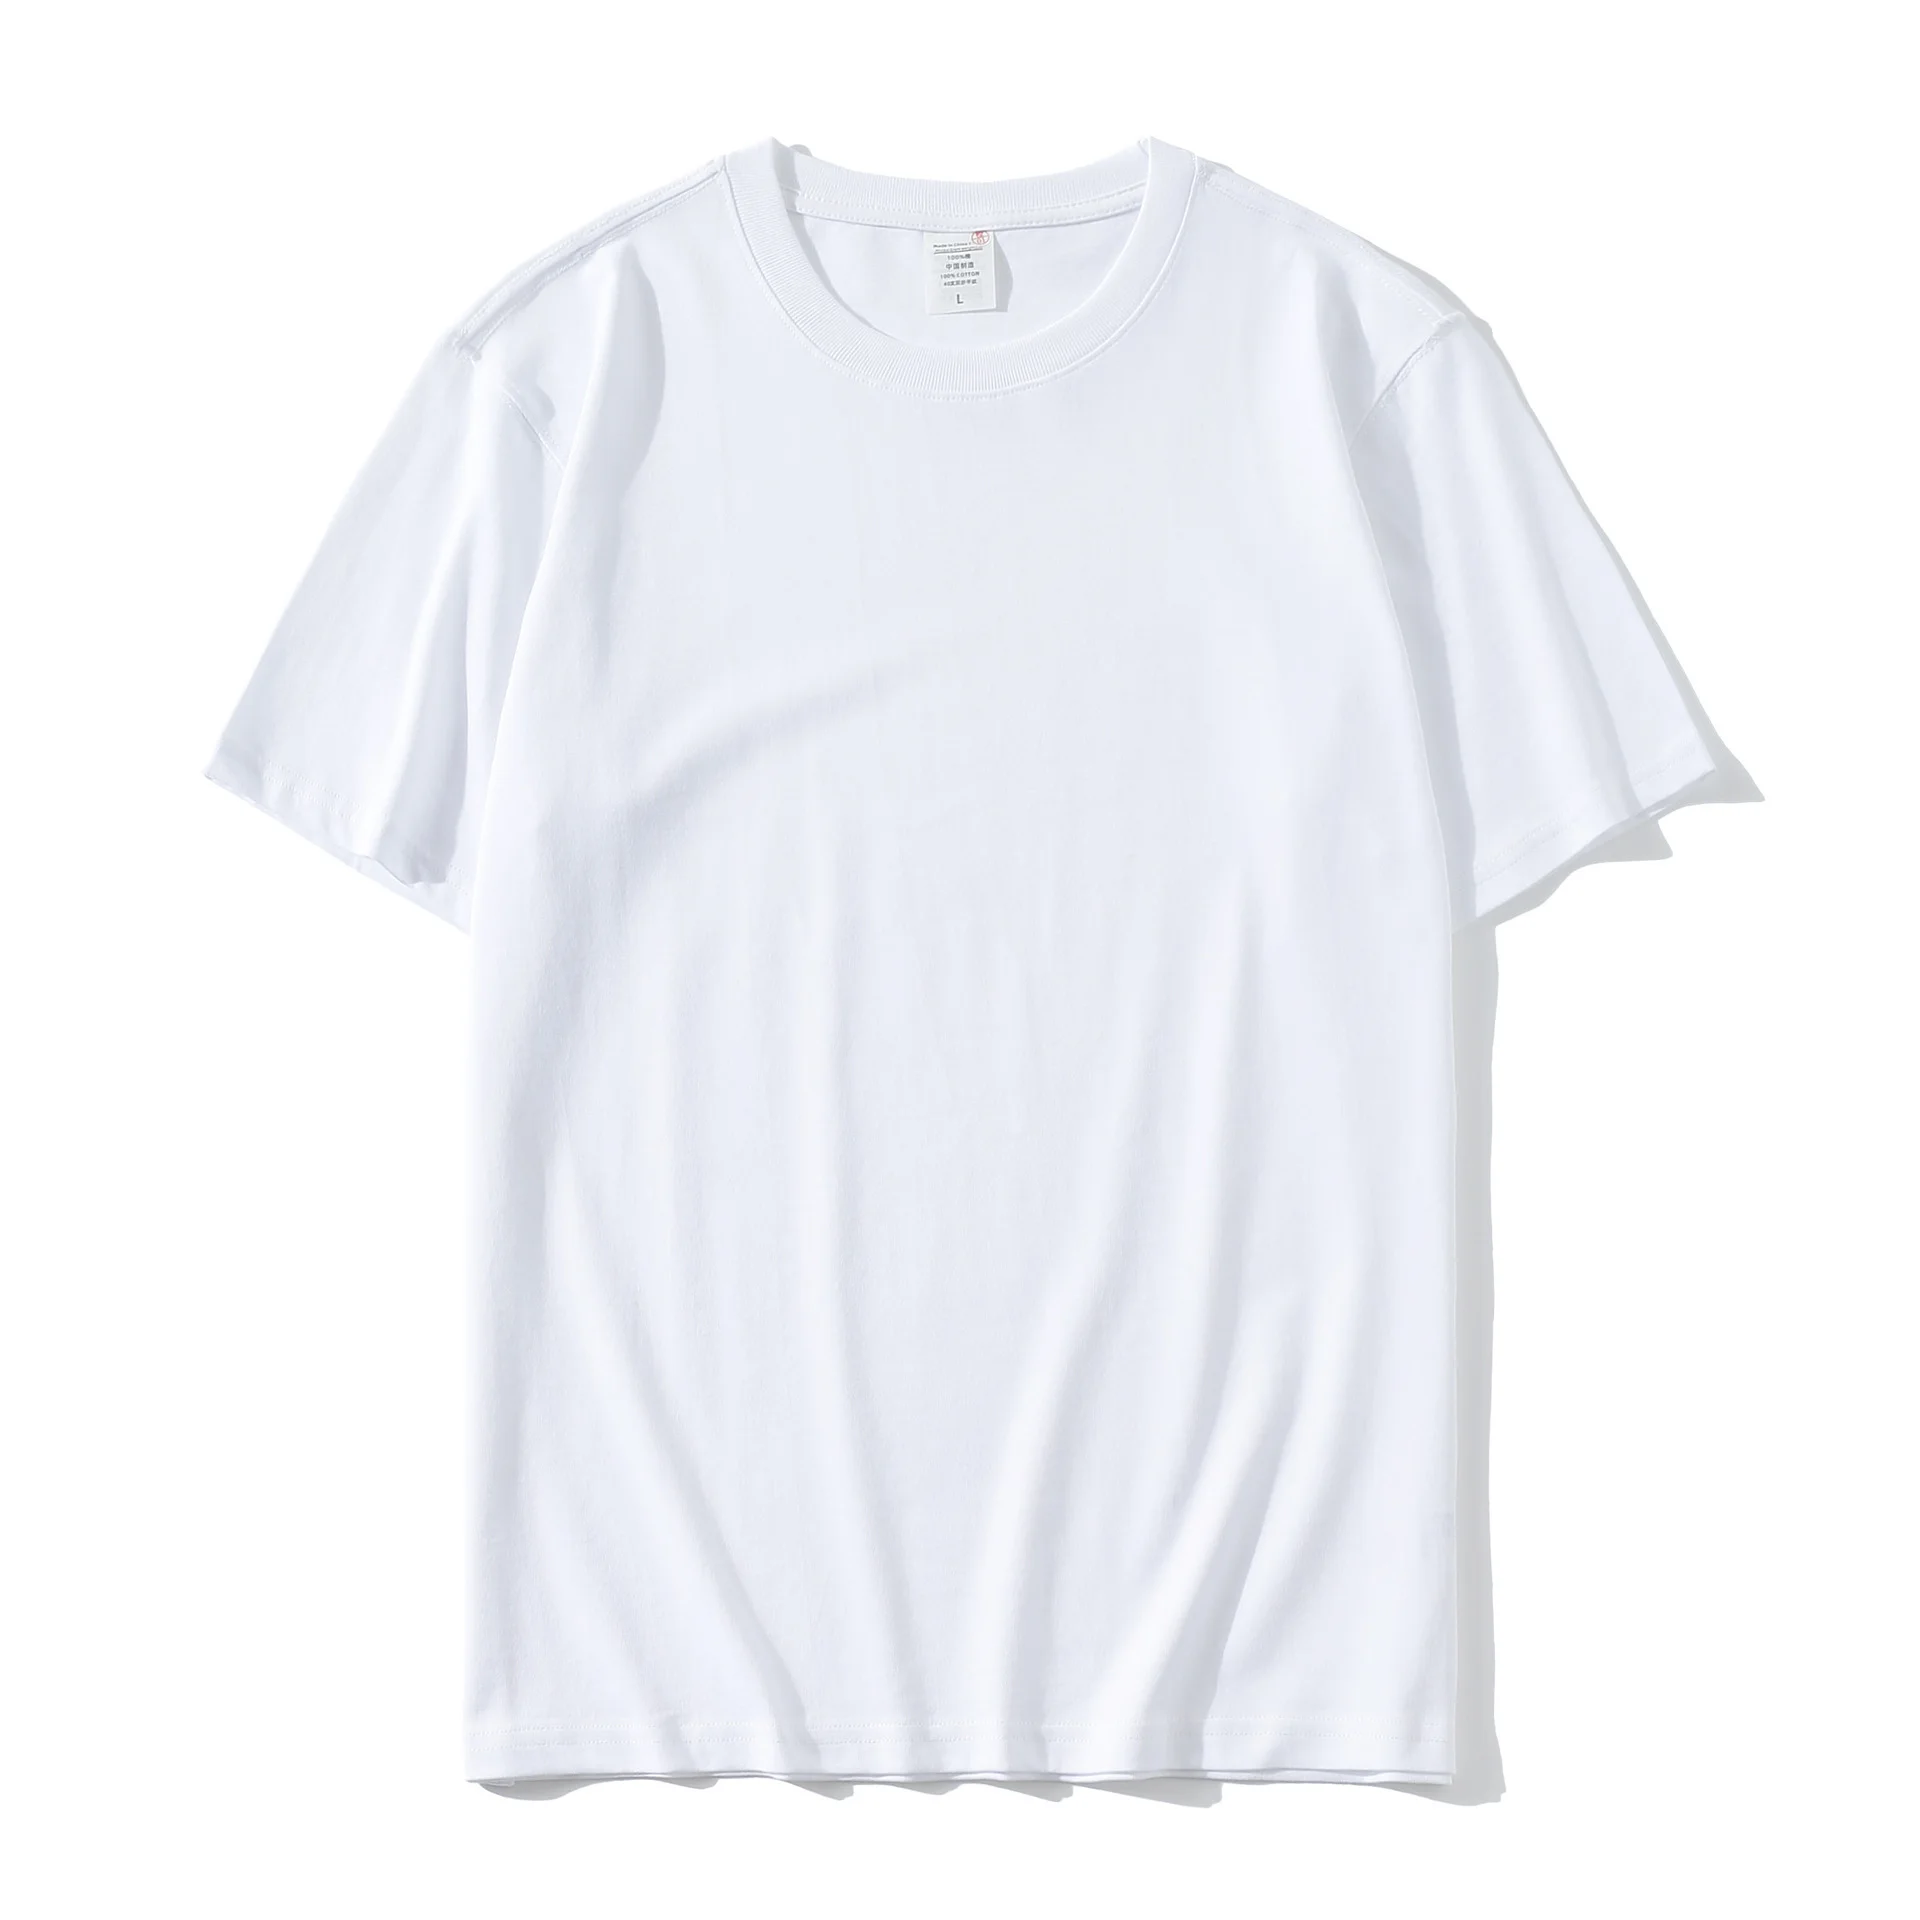 blank t-shirts tear away tag - Bangladesh Factory, Suppliers, Manufacturers